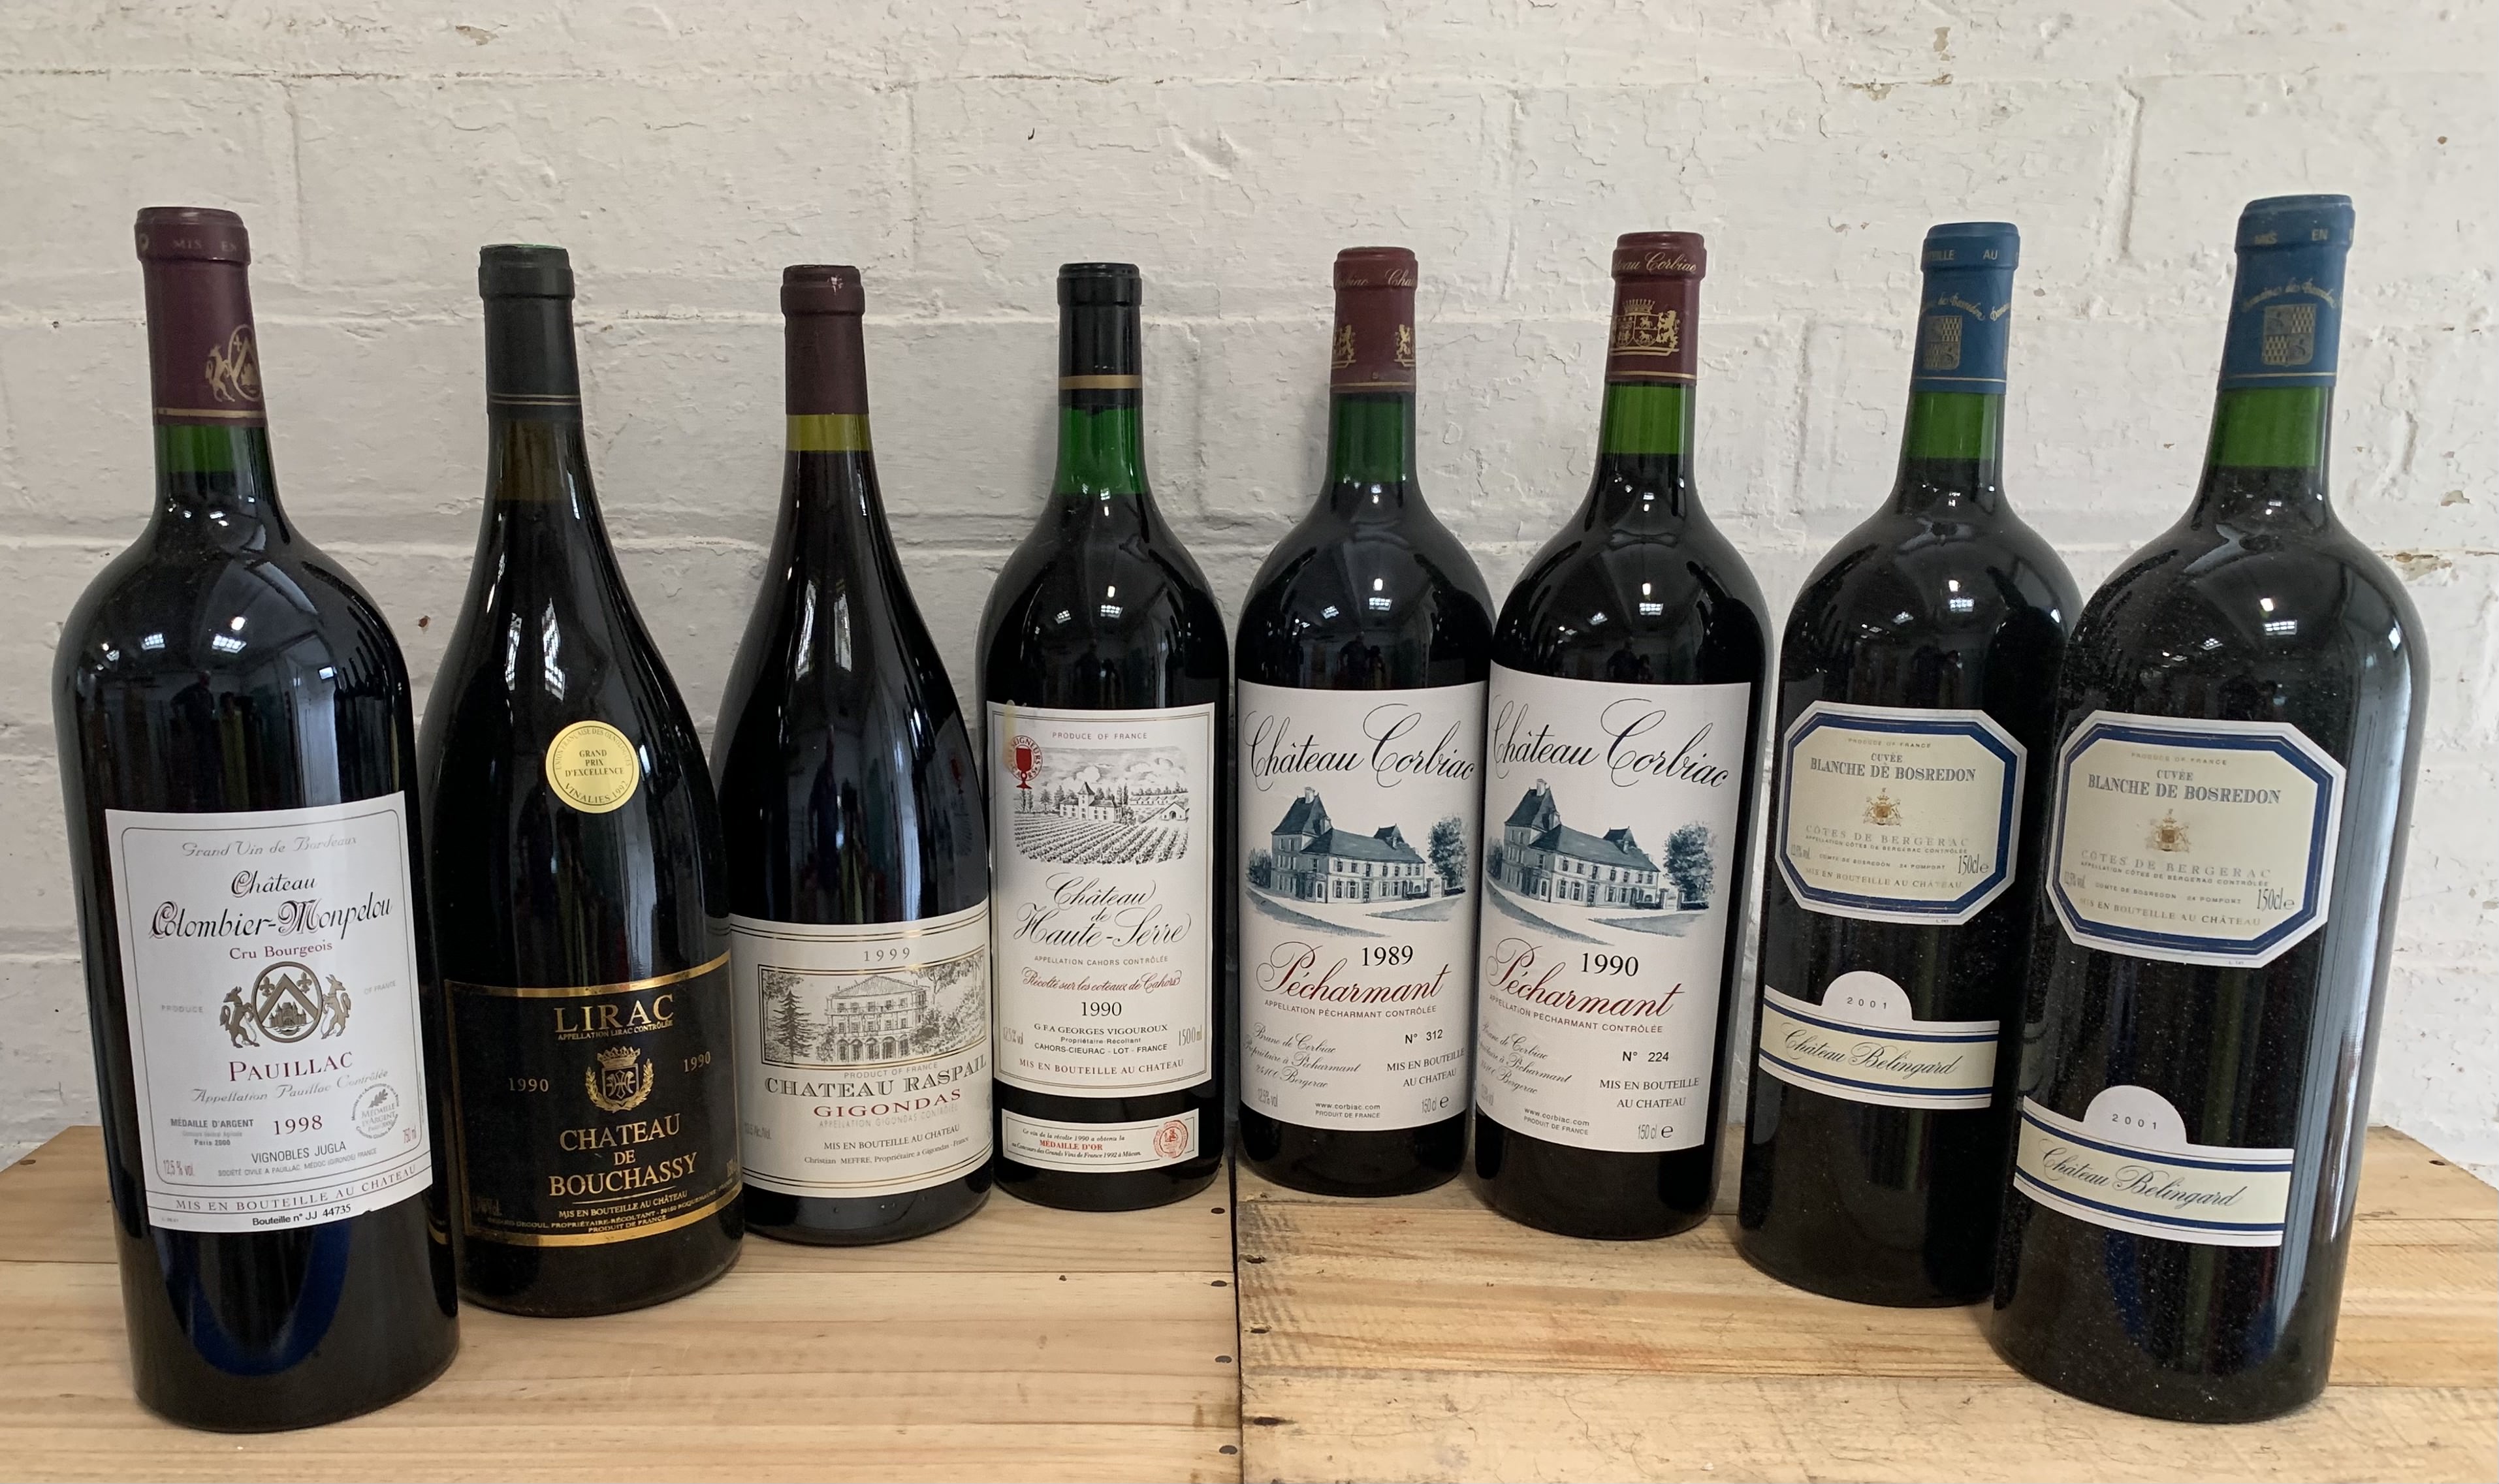 Collection of 8 Magnums from Bordeaux, Rhone Valley, Bergerac, Cahors and Pecharmant